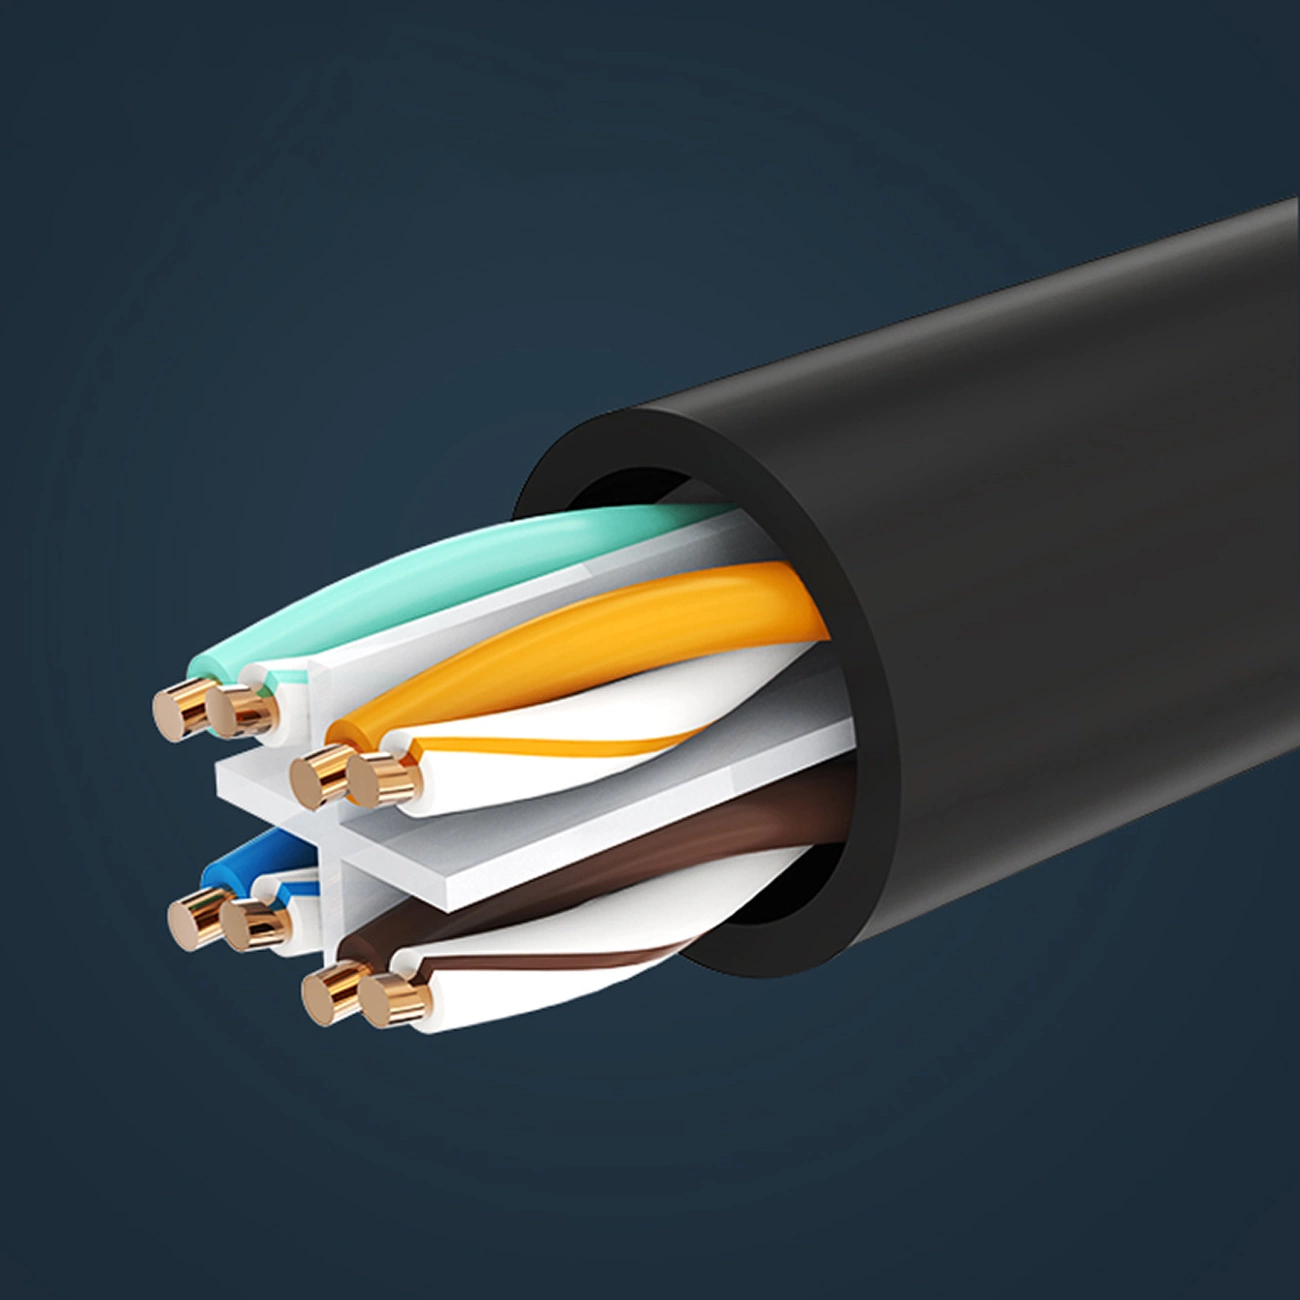 Cross-section of the Ugreen NW112 Ethernet network cable